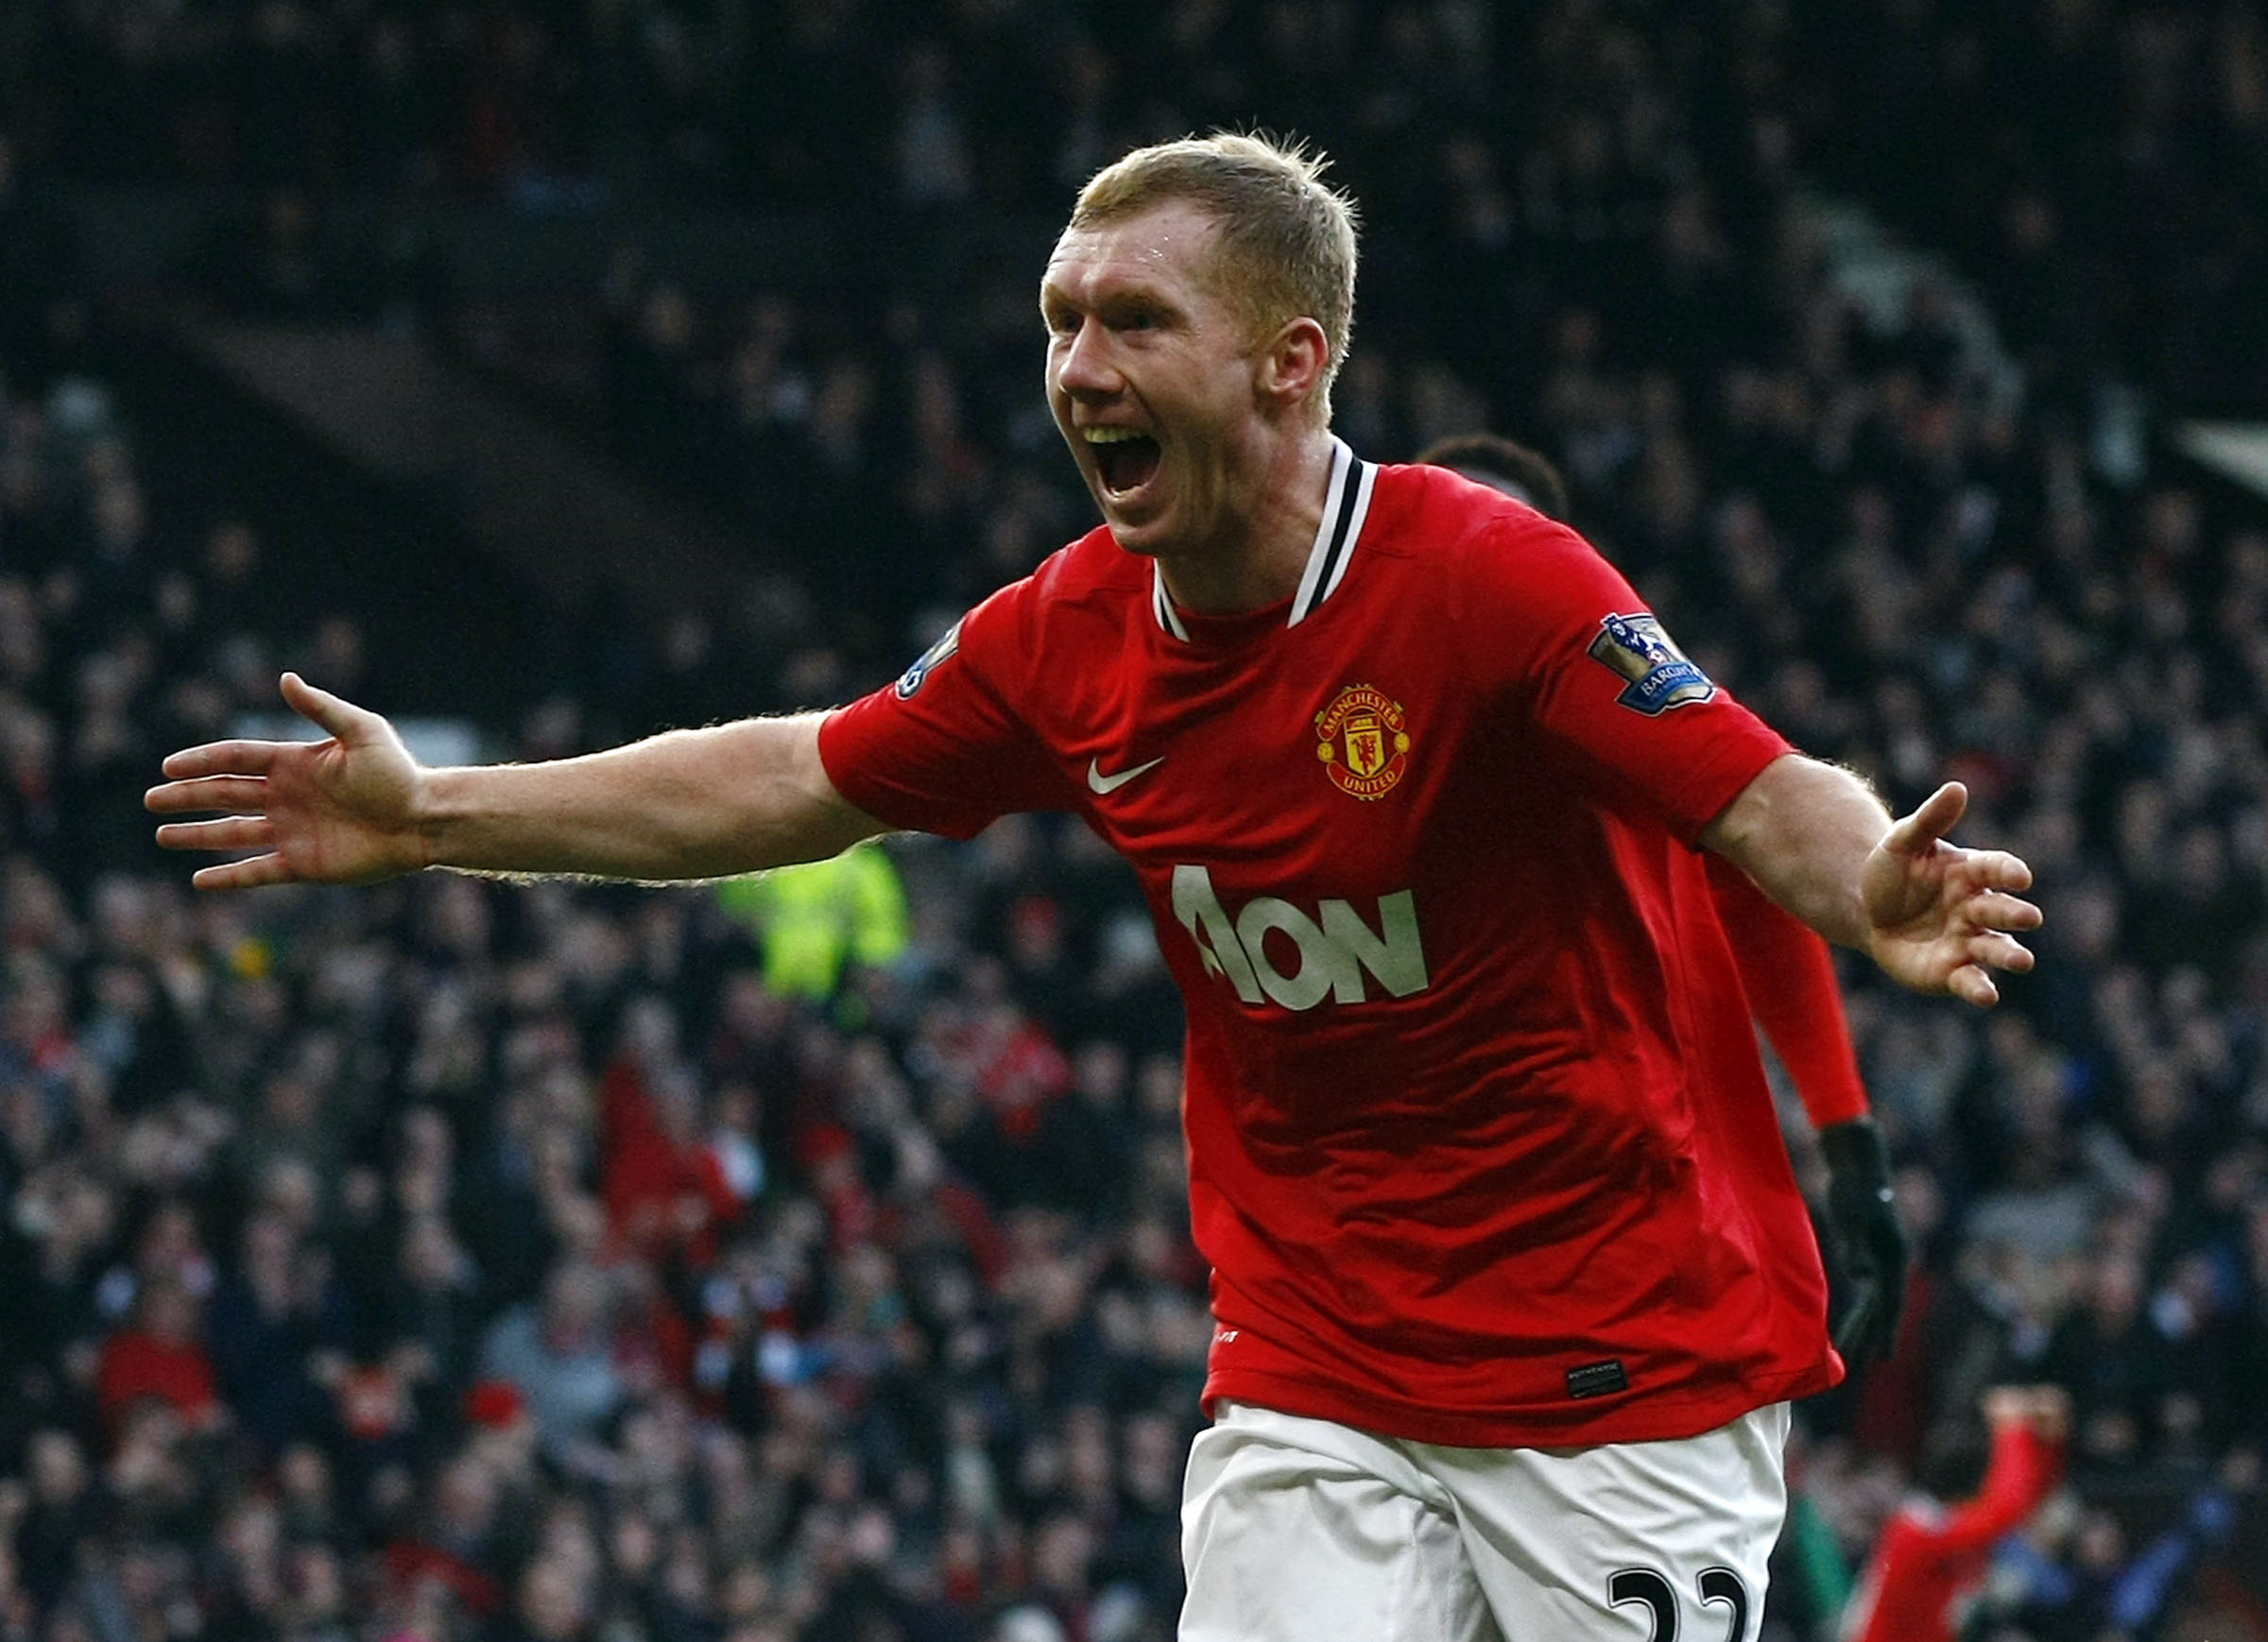 Paul Scholes' career at Manchester United has spanned 19 years and 716 appearances. Photo: Reuters